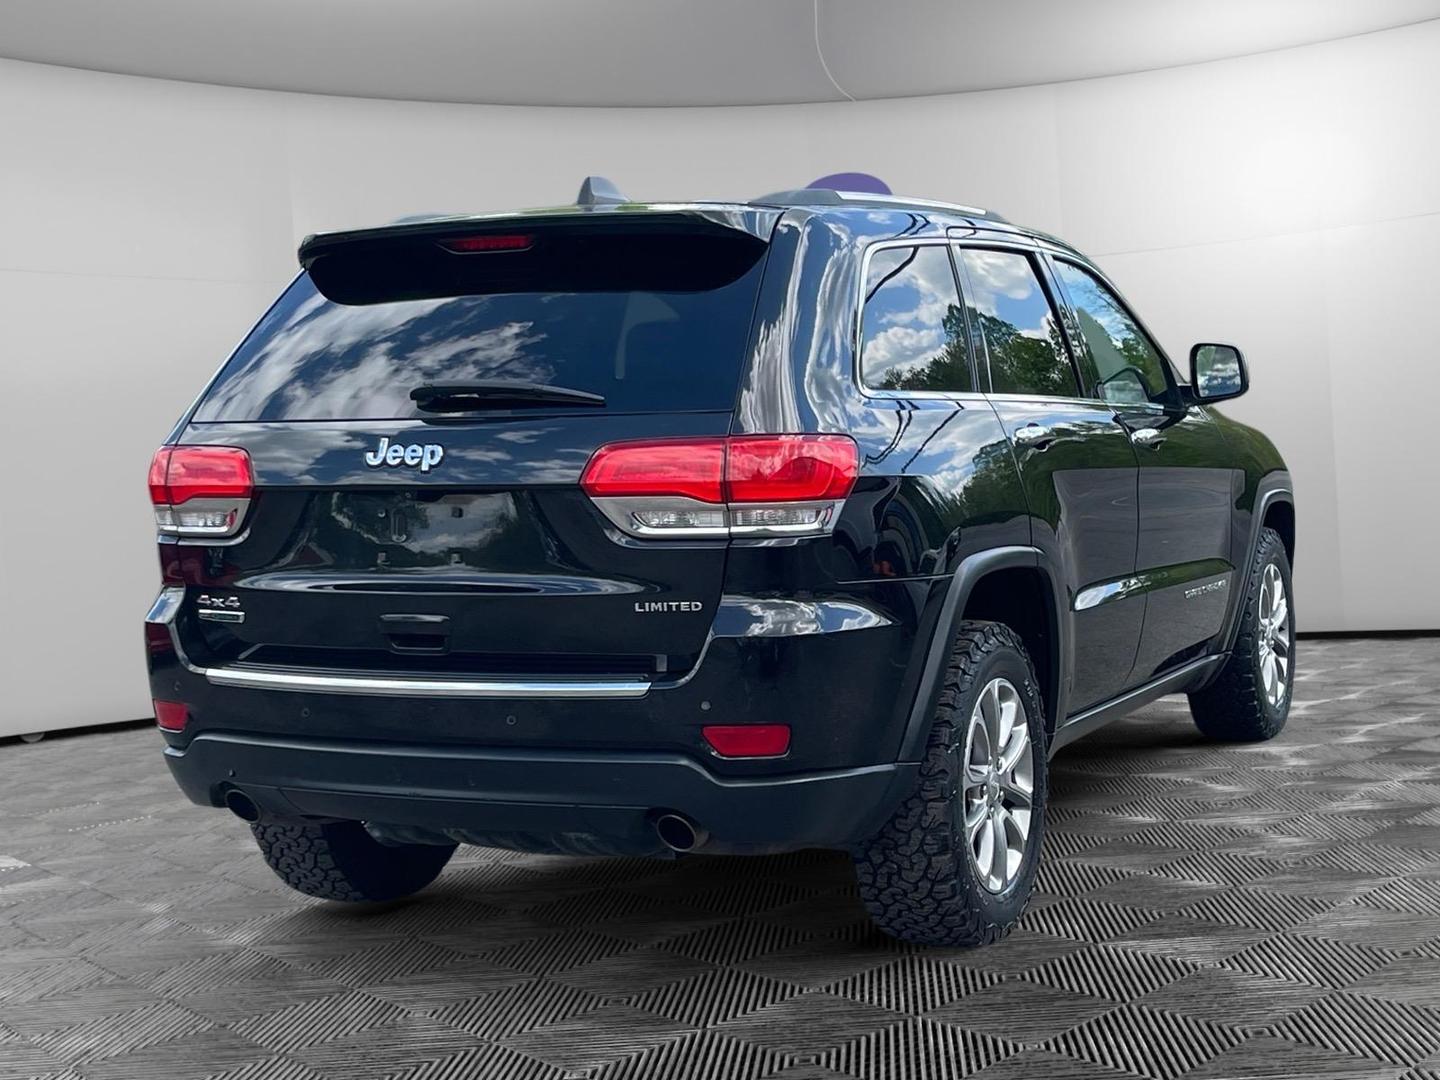 2015 Jeep Grand Cherokee Utility 4d Limited 4wd 3.0l V6 T-diesel - Image 5